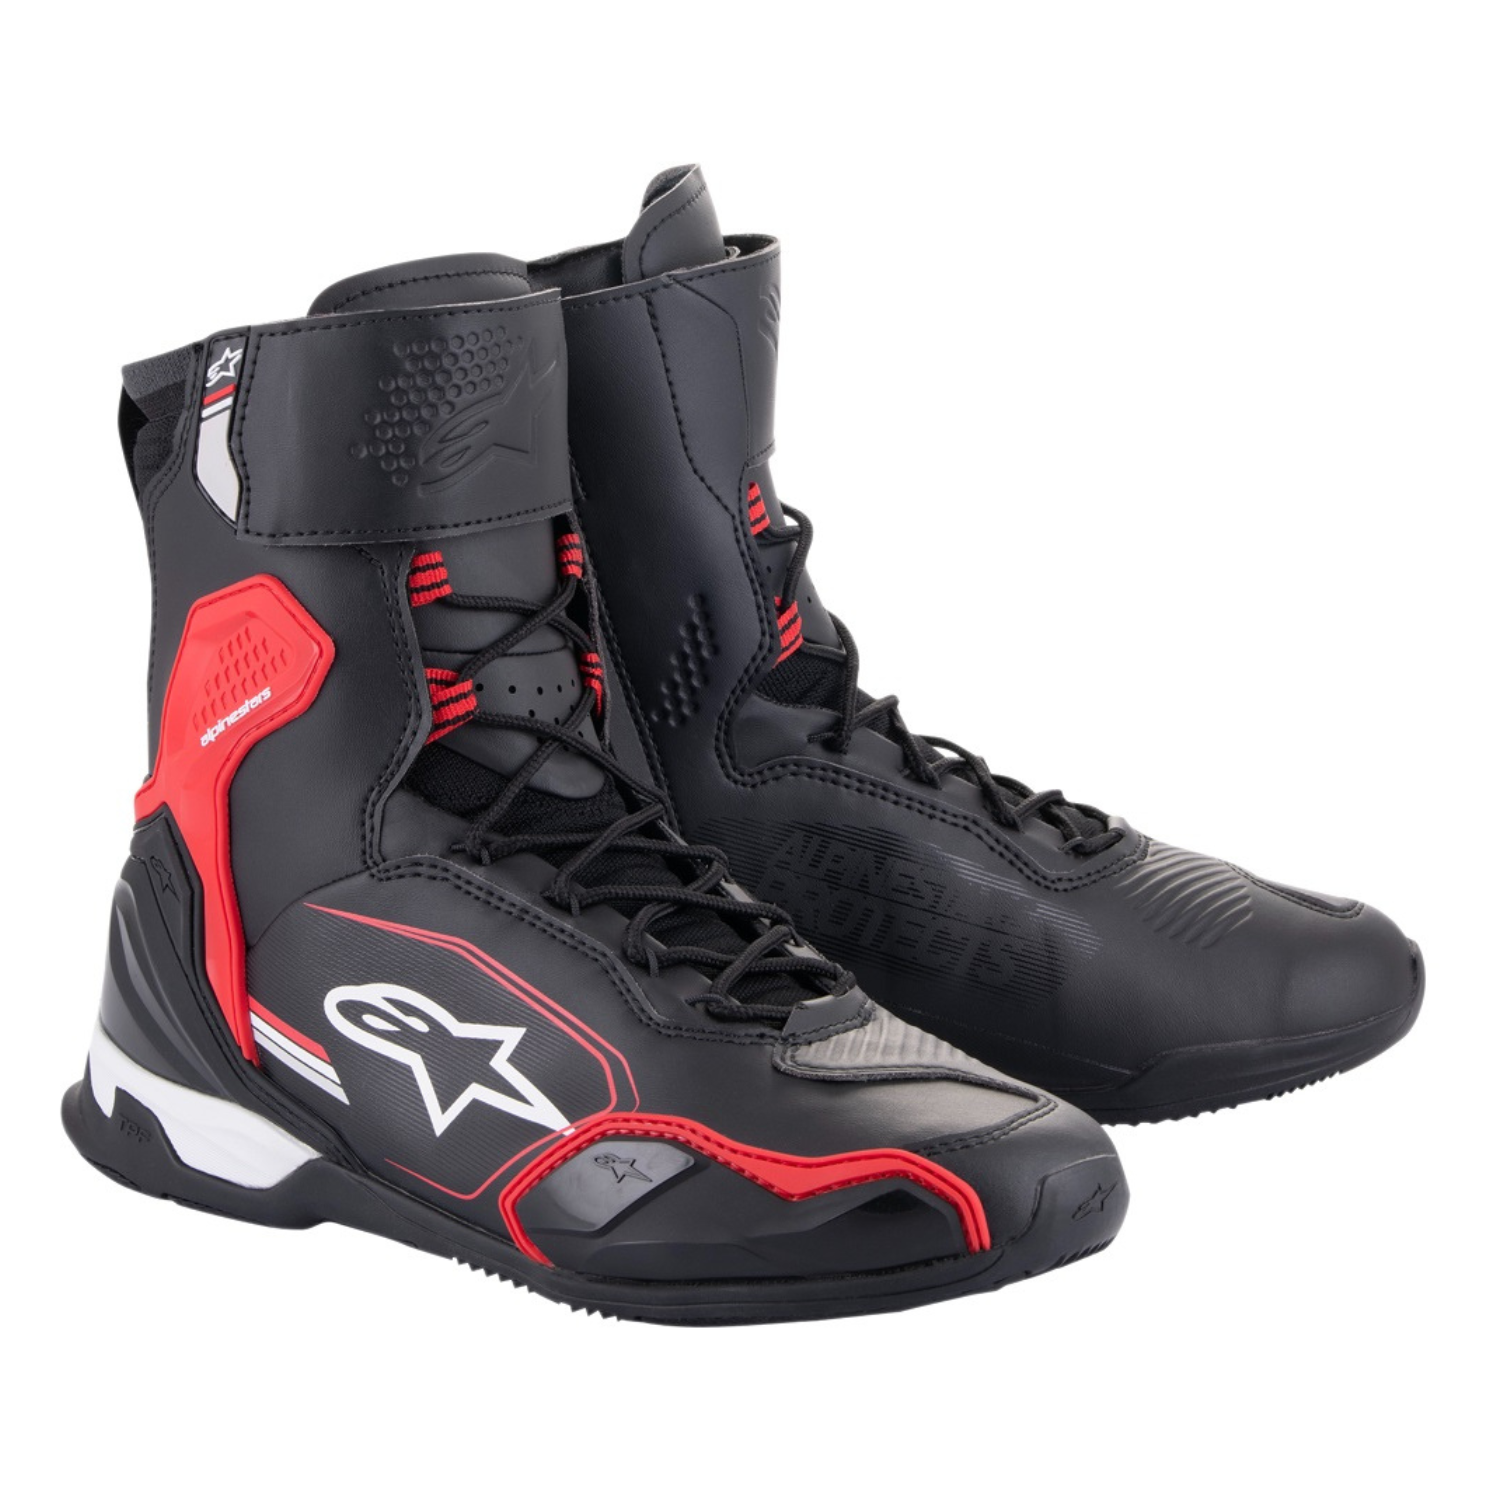 Image of Alpinestars Superfaster Shoes Black Bright Red White Talla US 135